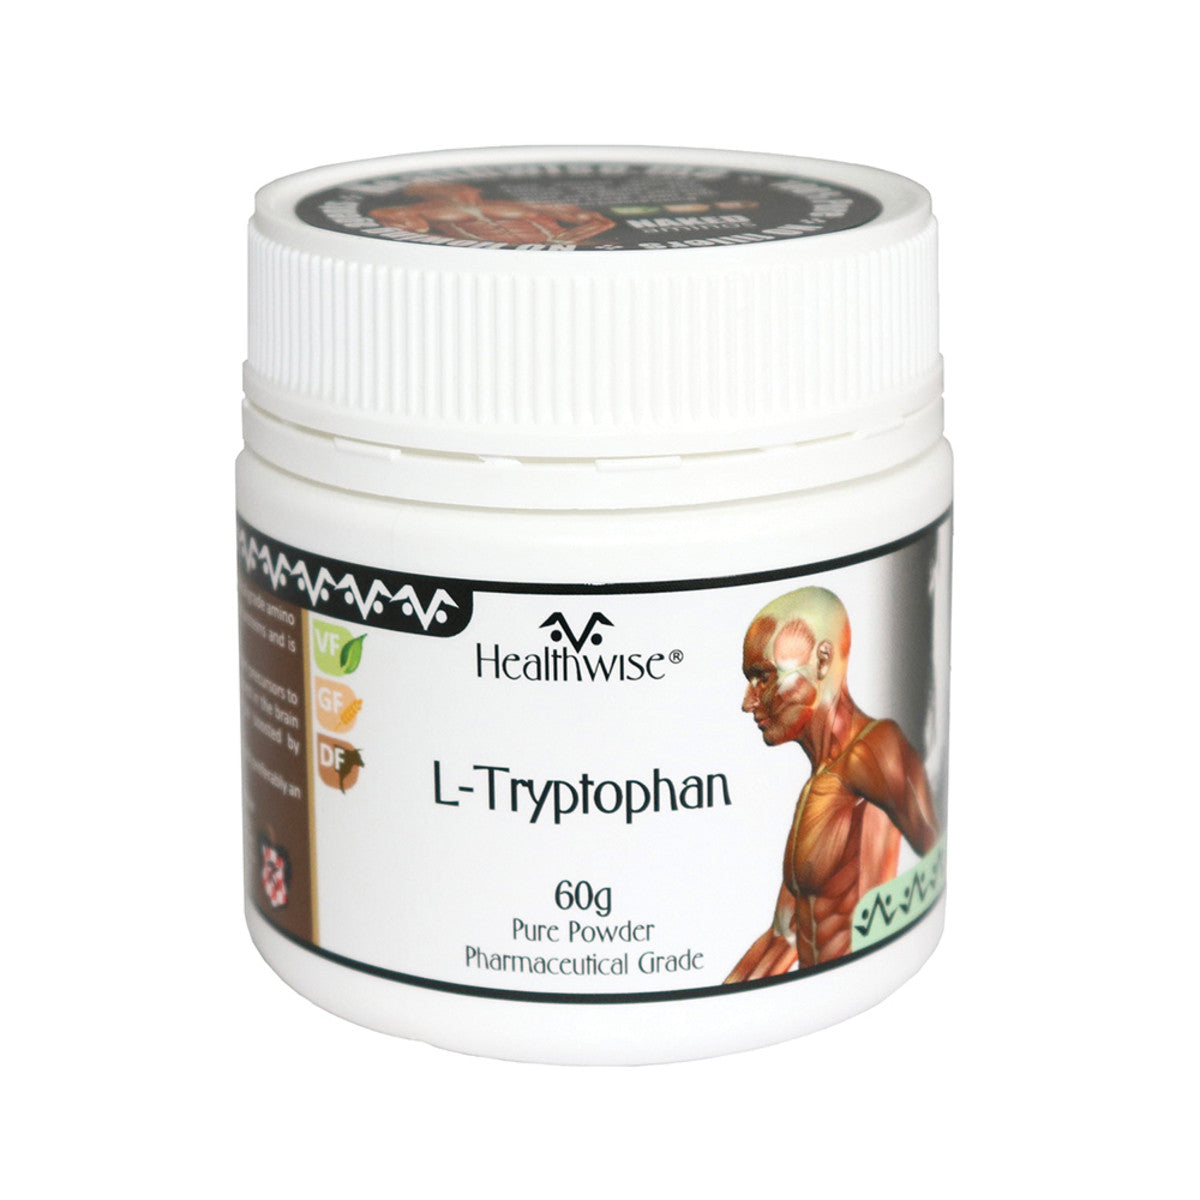 HealthWise - L-Tryptophan